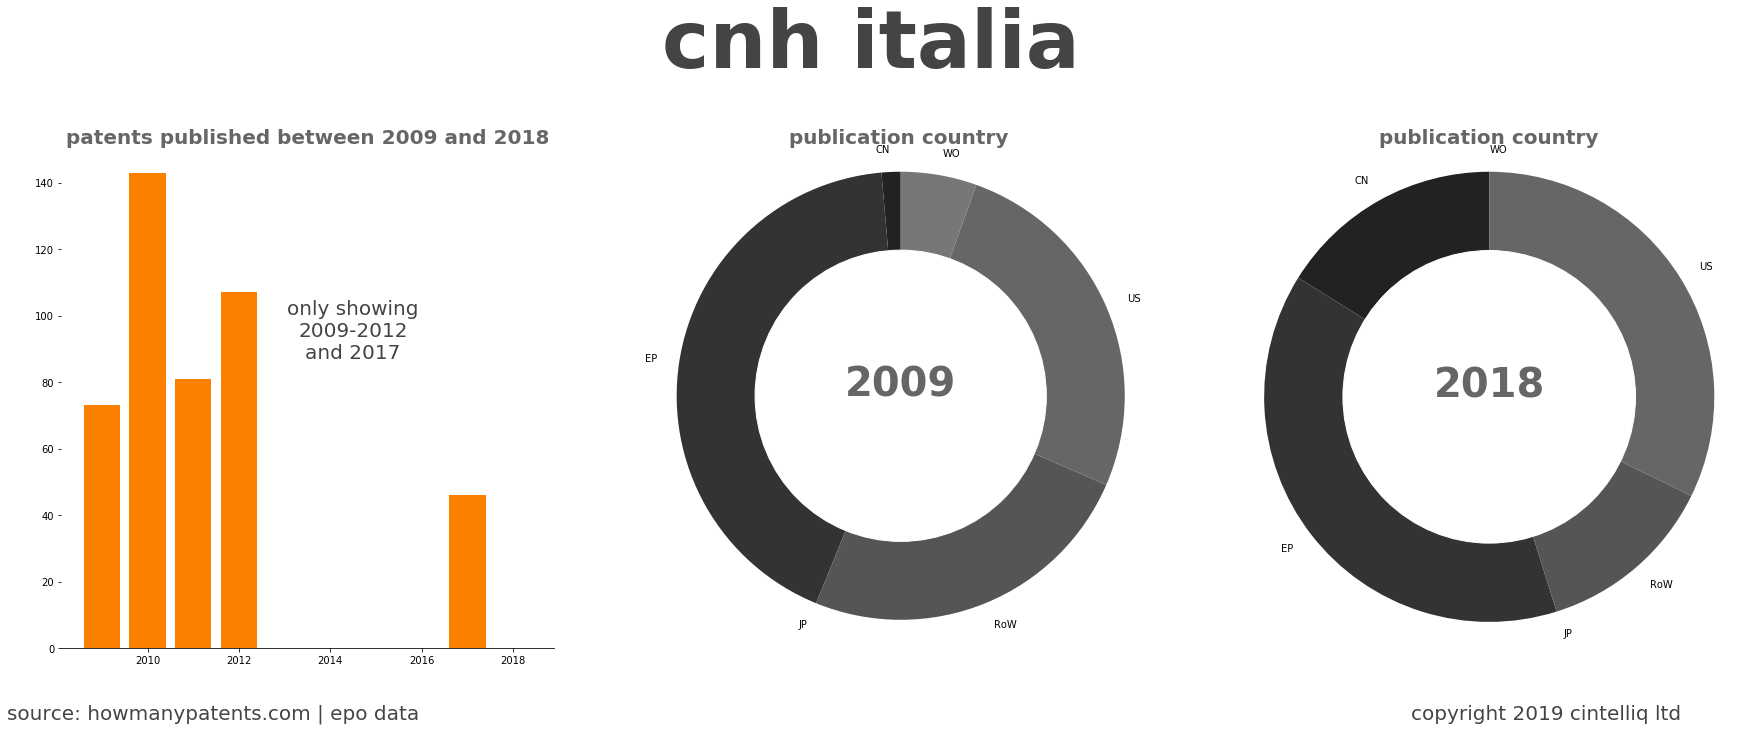 summary of patents for Cnh Italia